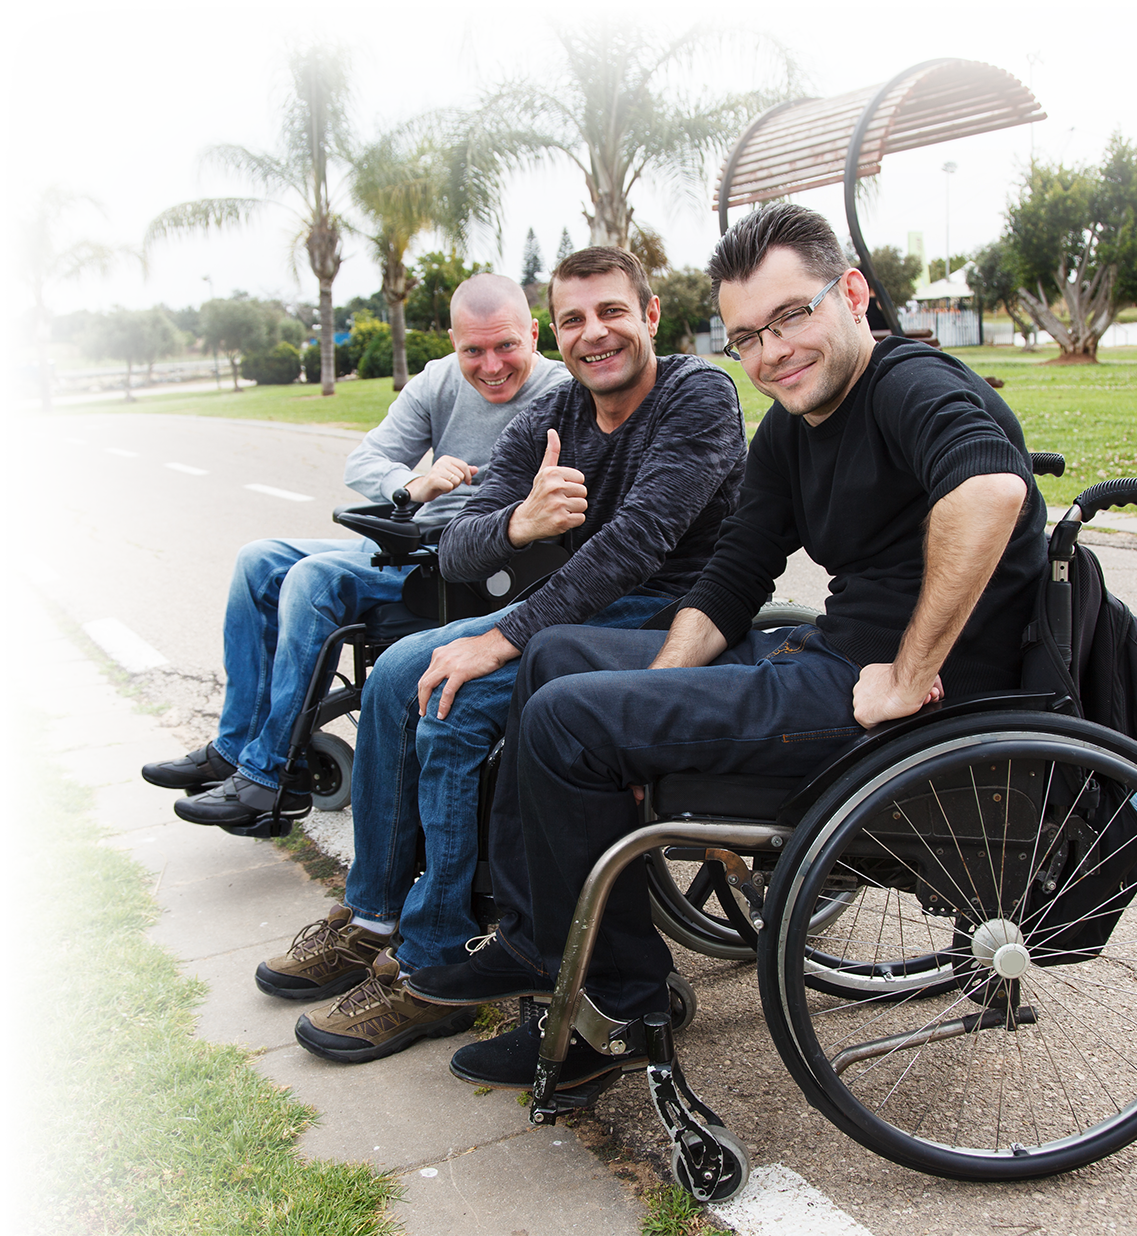 Three men together at a park in their wheelchairs.